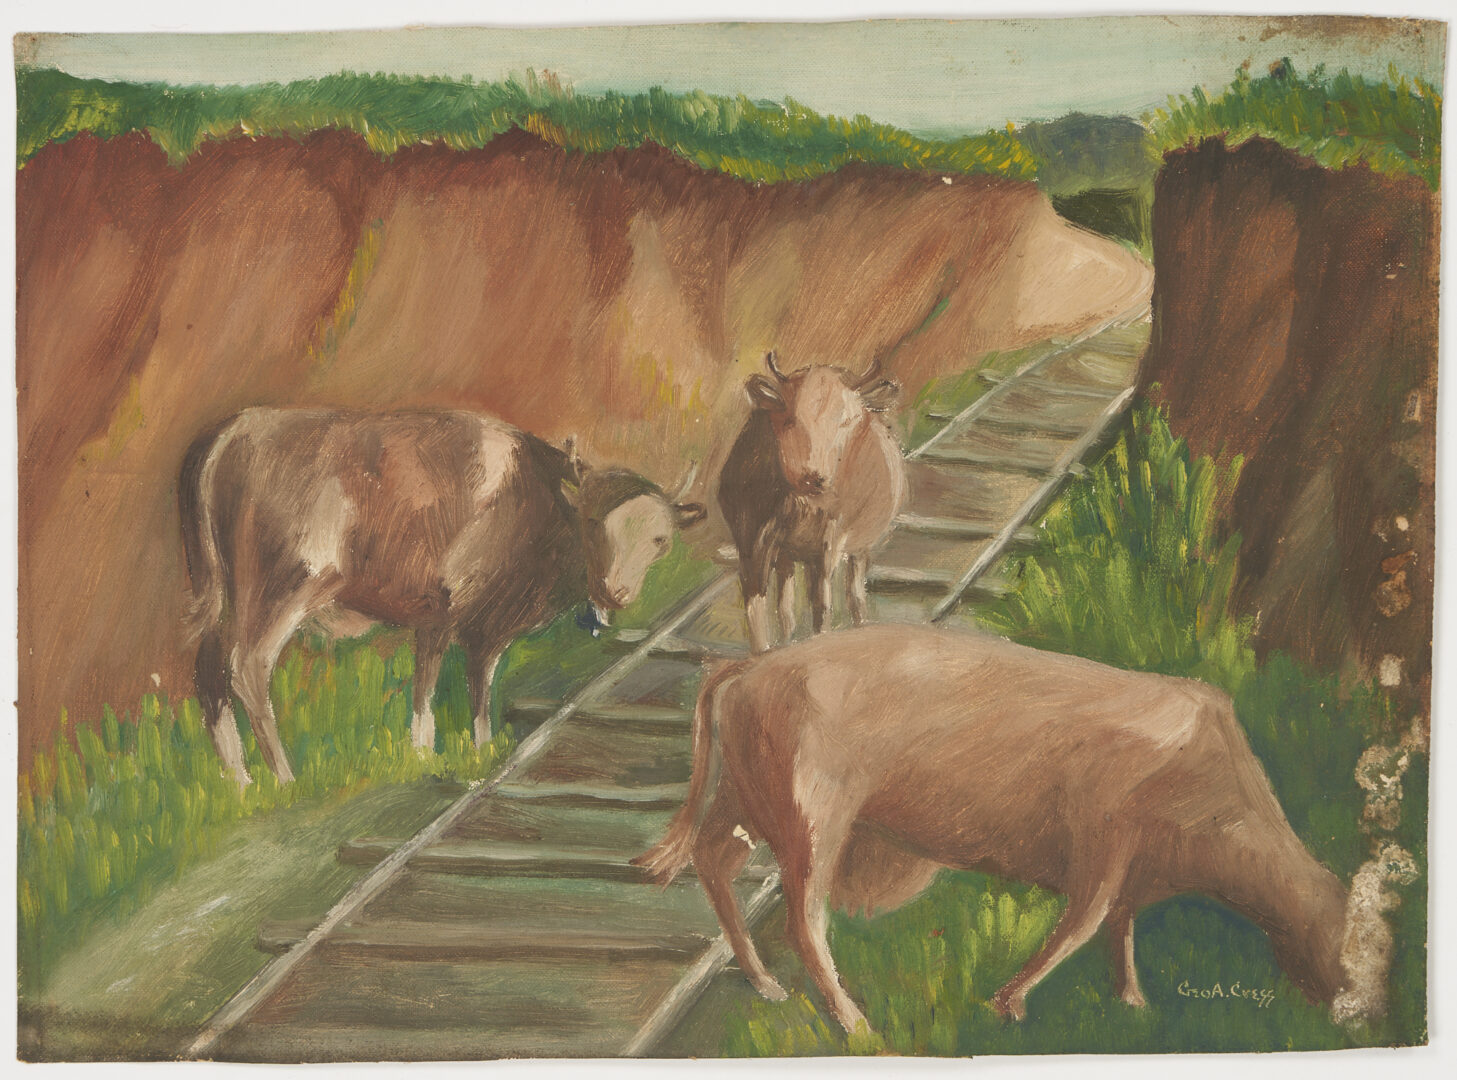 Lot 851: 5 George Cress Paintings, incl. O/C of Cows, 4 Watercolors